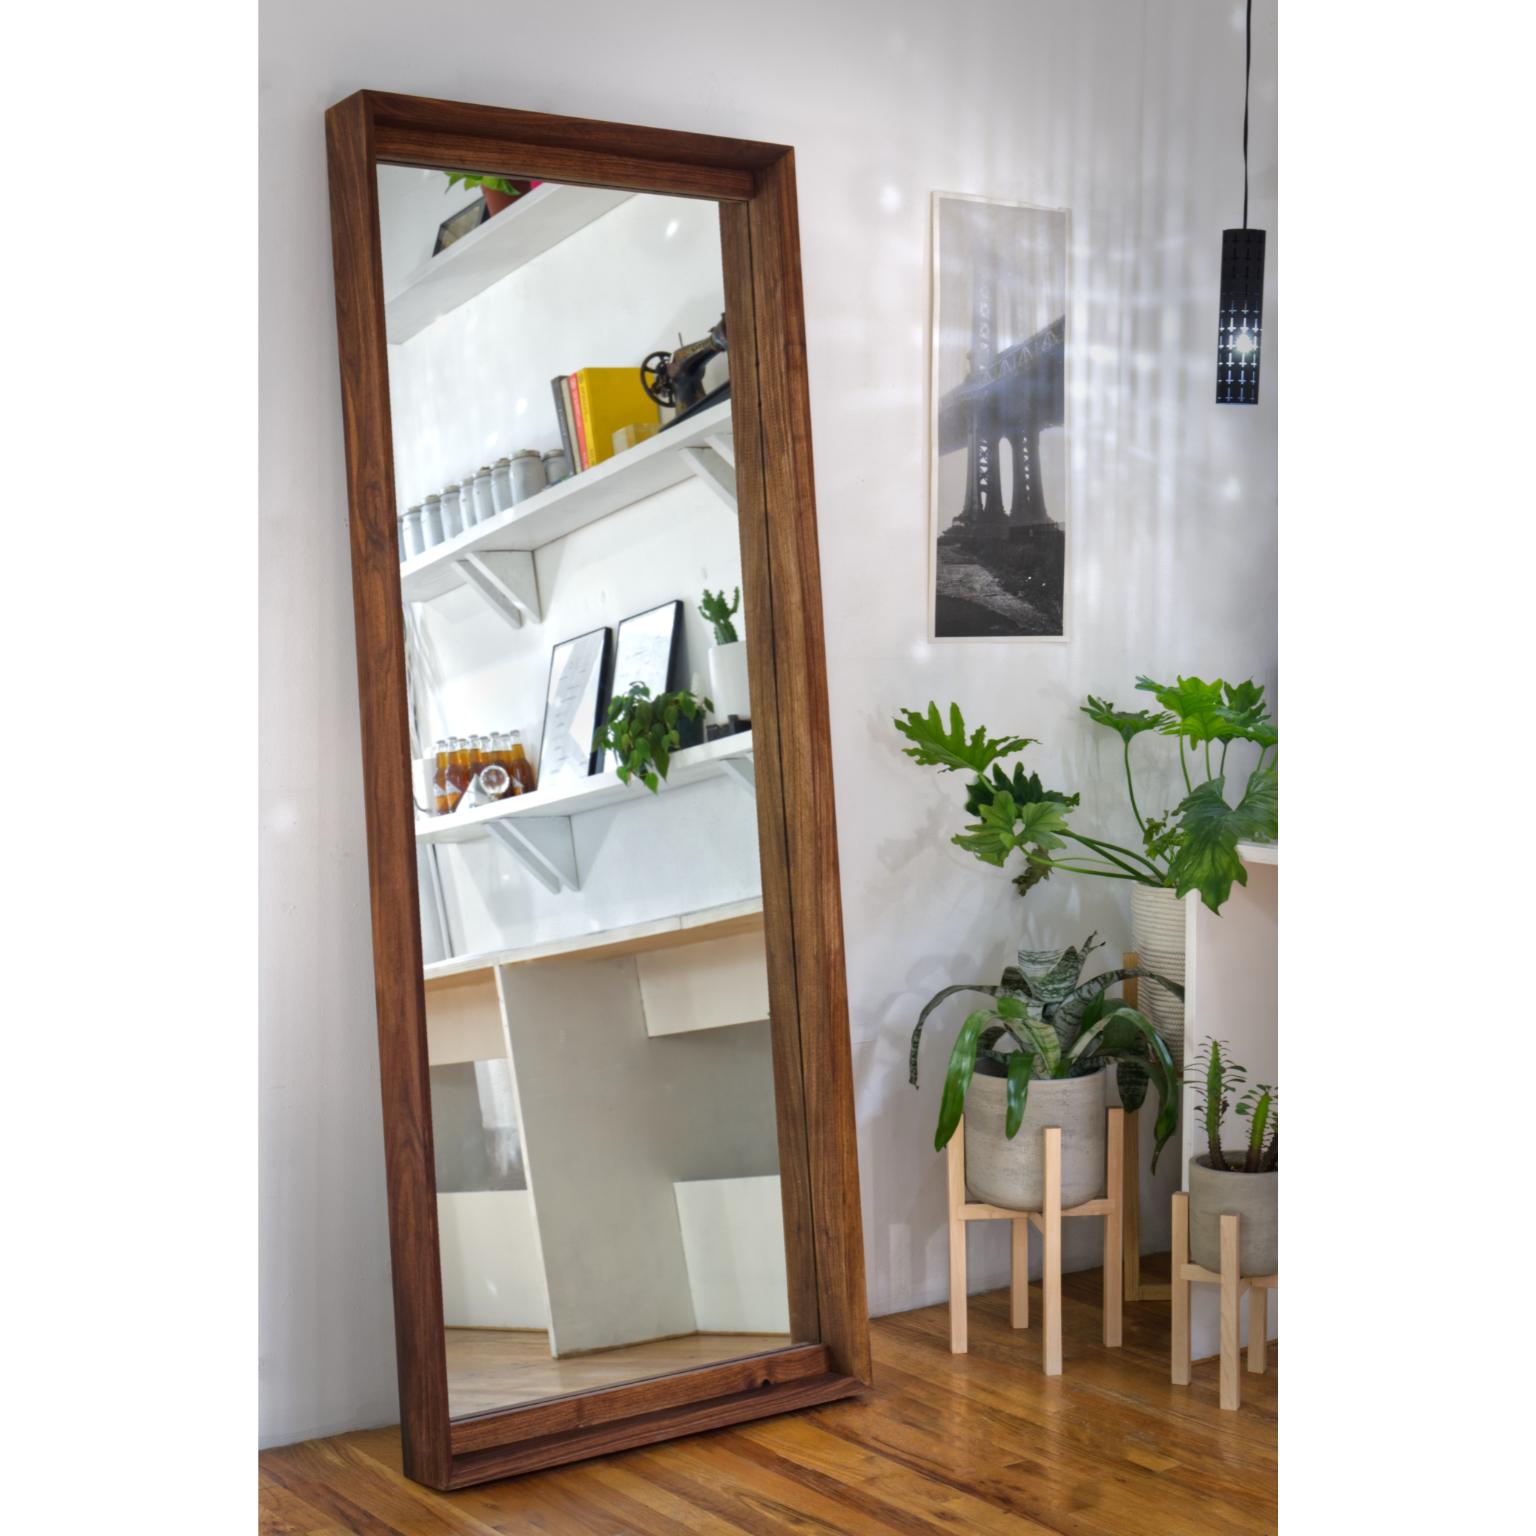 Constructed from solid American walnut the mirror is a portal to another universe. Standing at 6’+ tall it doubles space and stands at your favorite wall for the creation of the days outfit. The the frame is 1